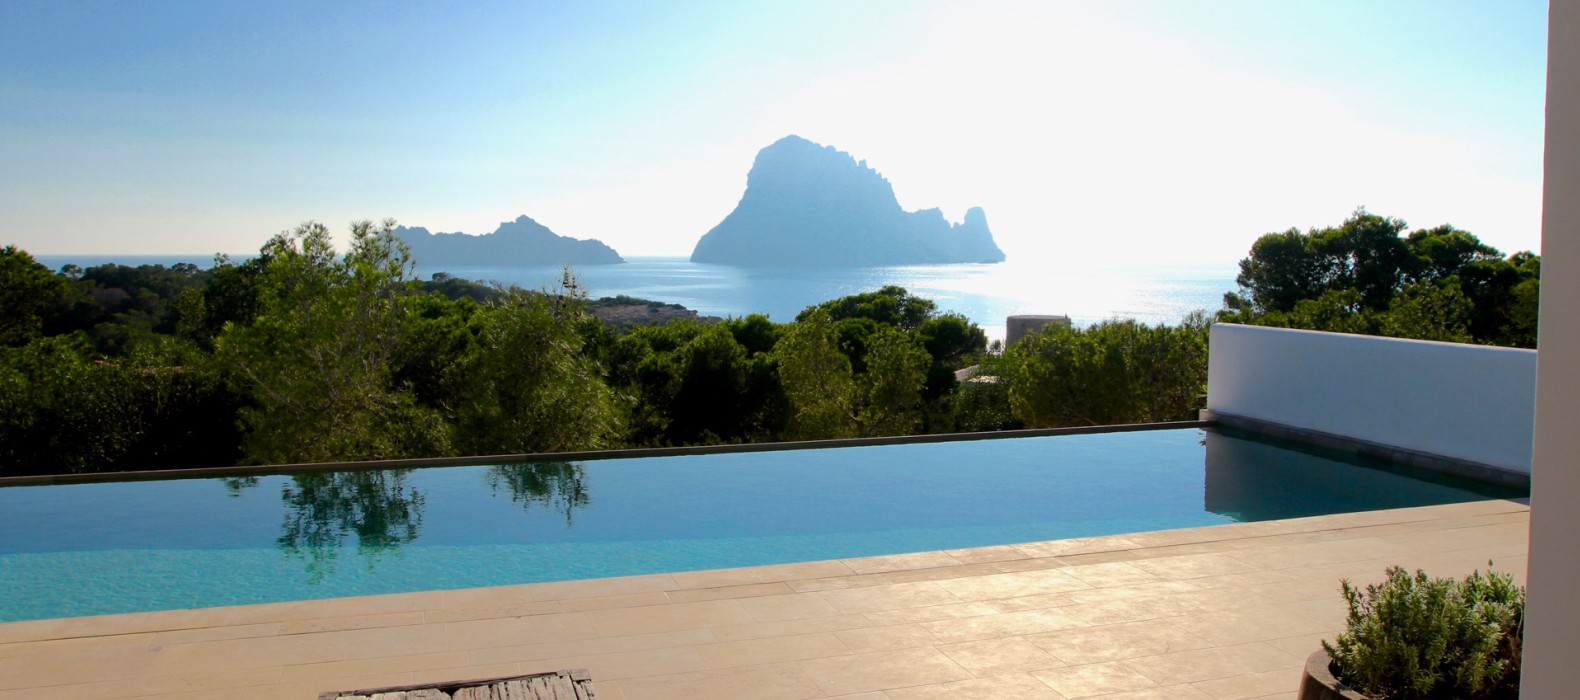 Pool with Es Vedra view of Villa Sunrise Joy in Ibiza